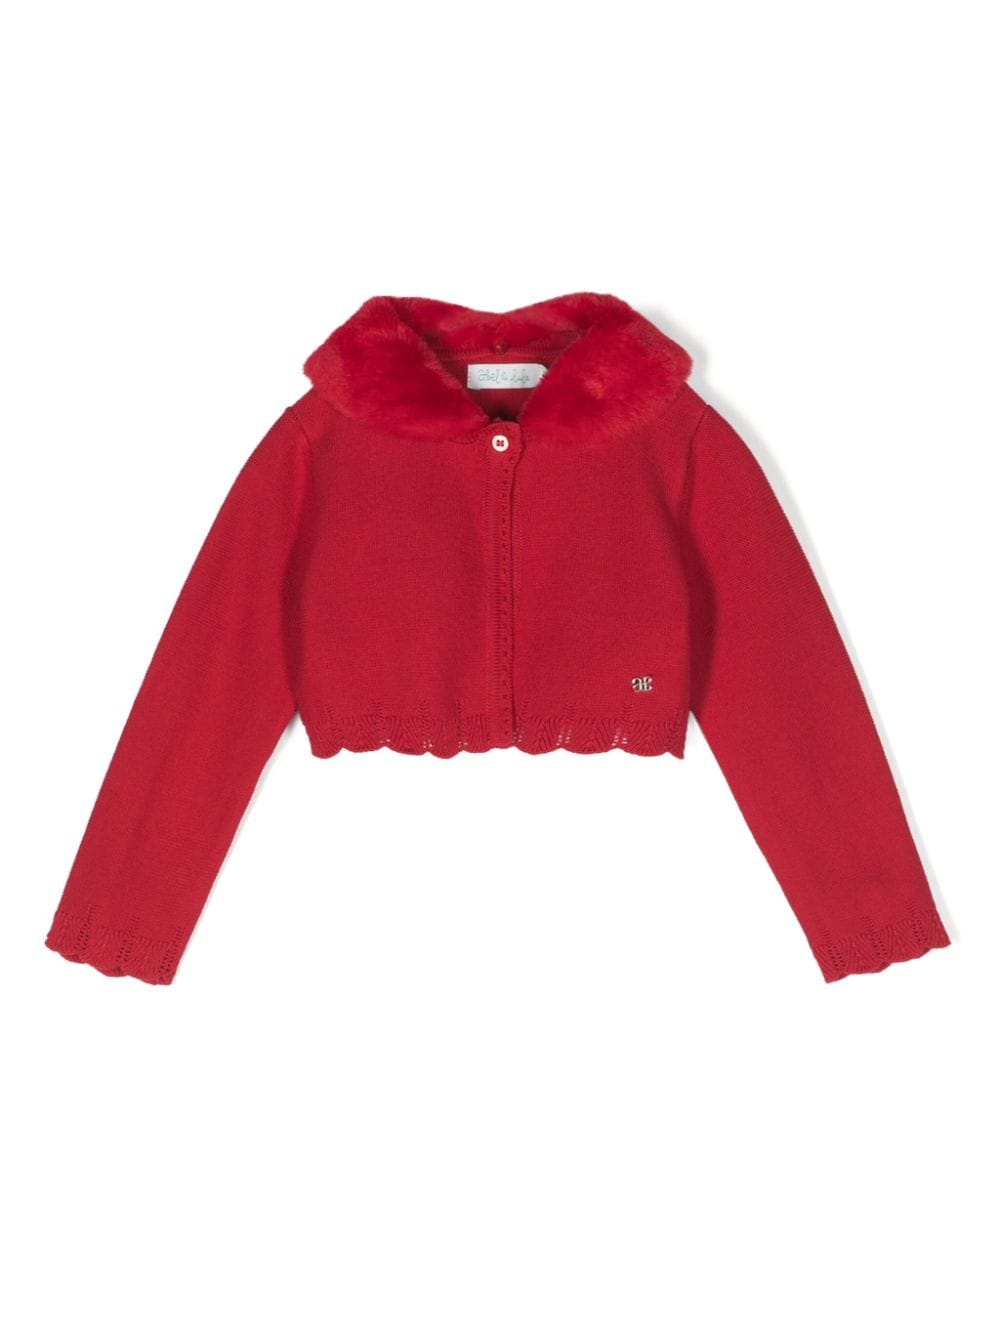 Red cardigan for baby girls with fur collar